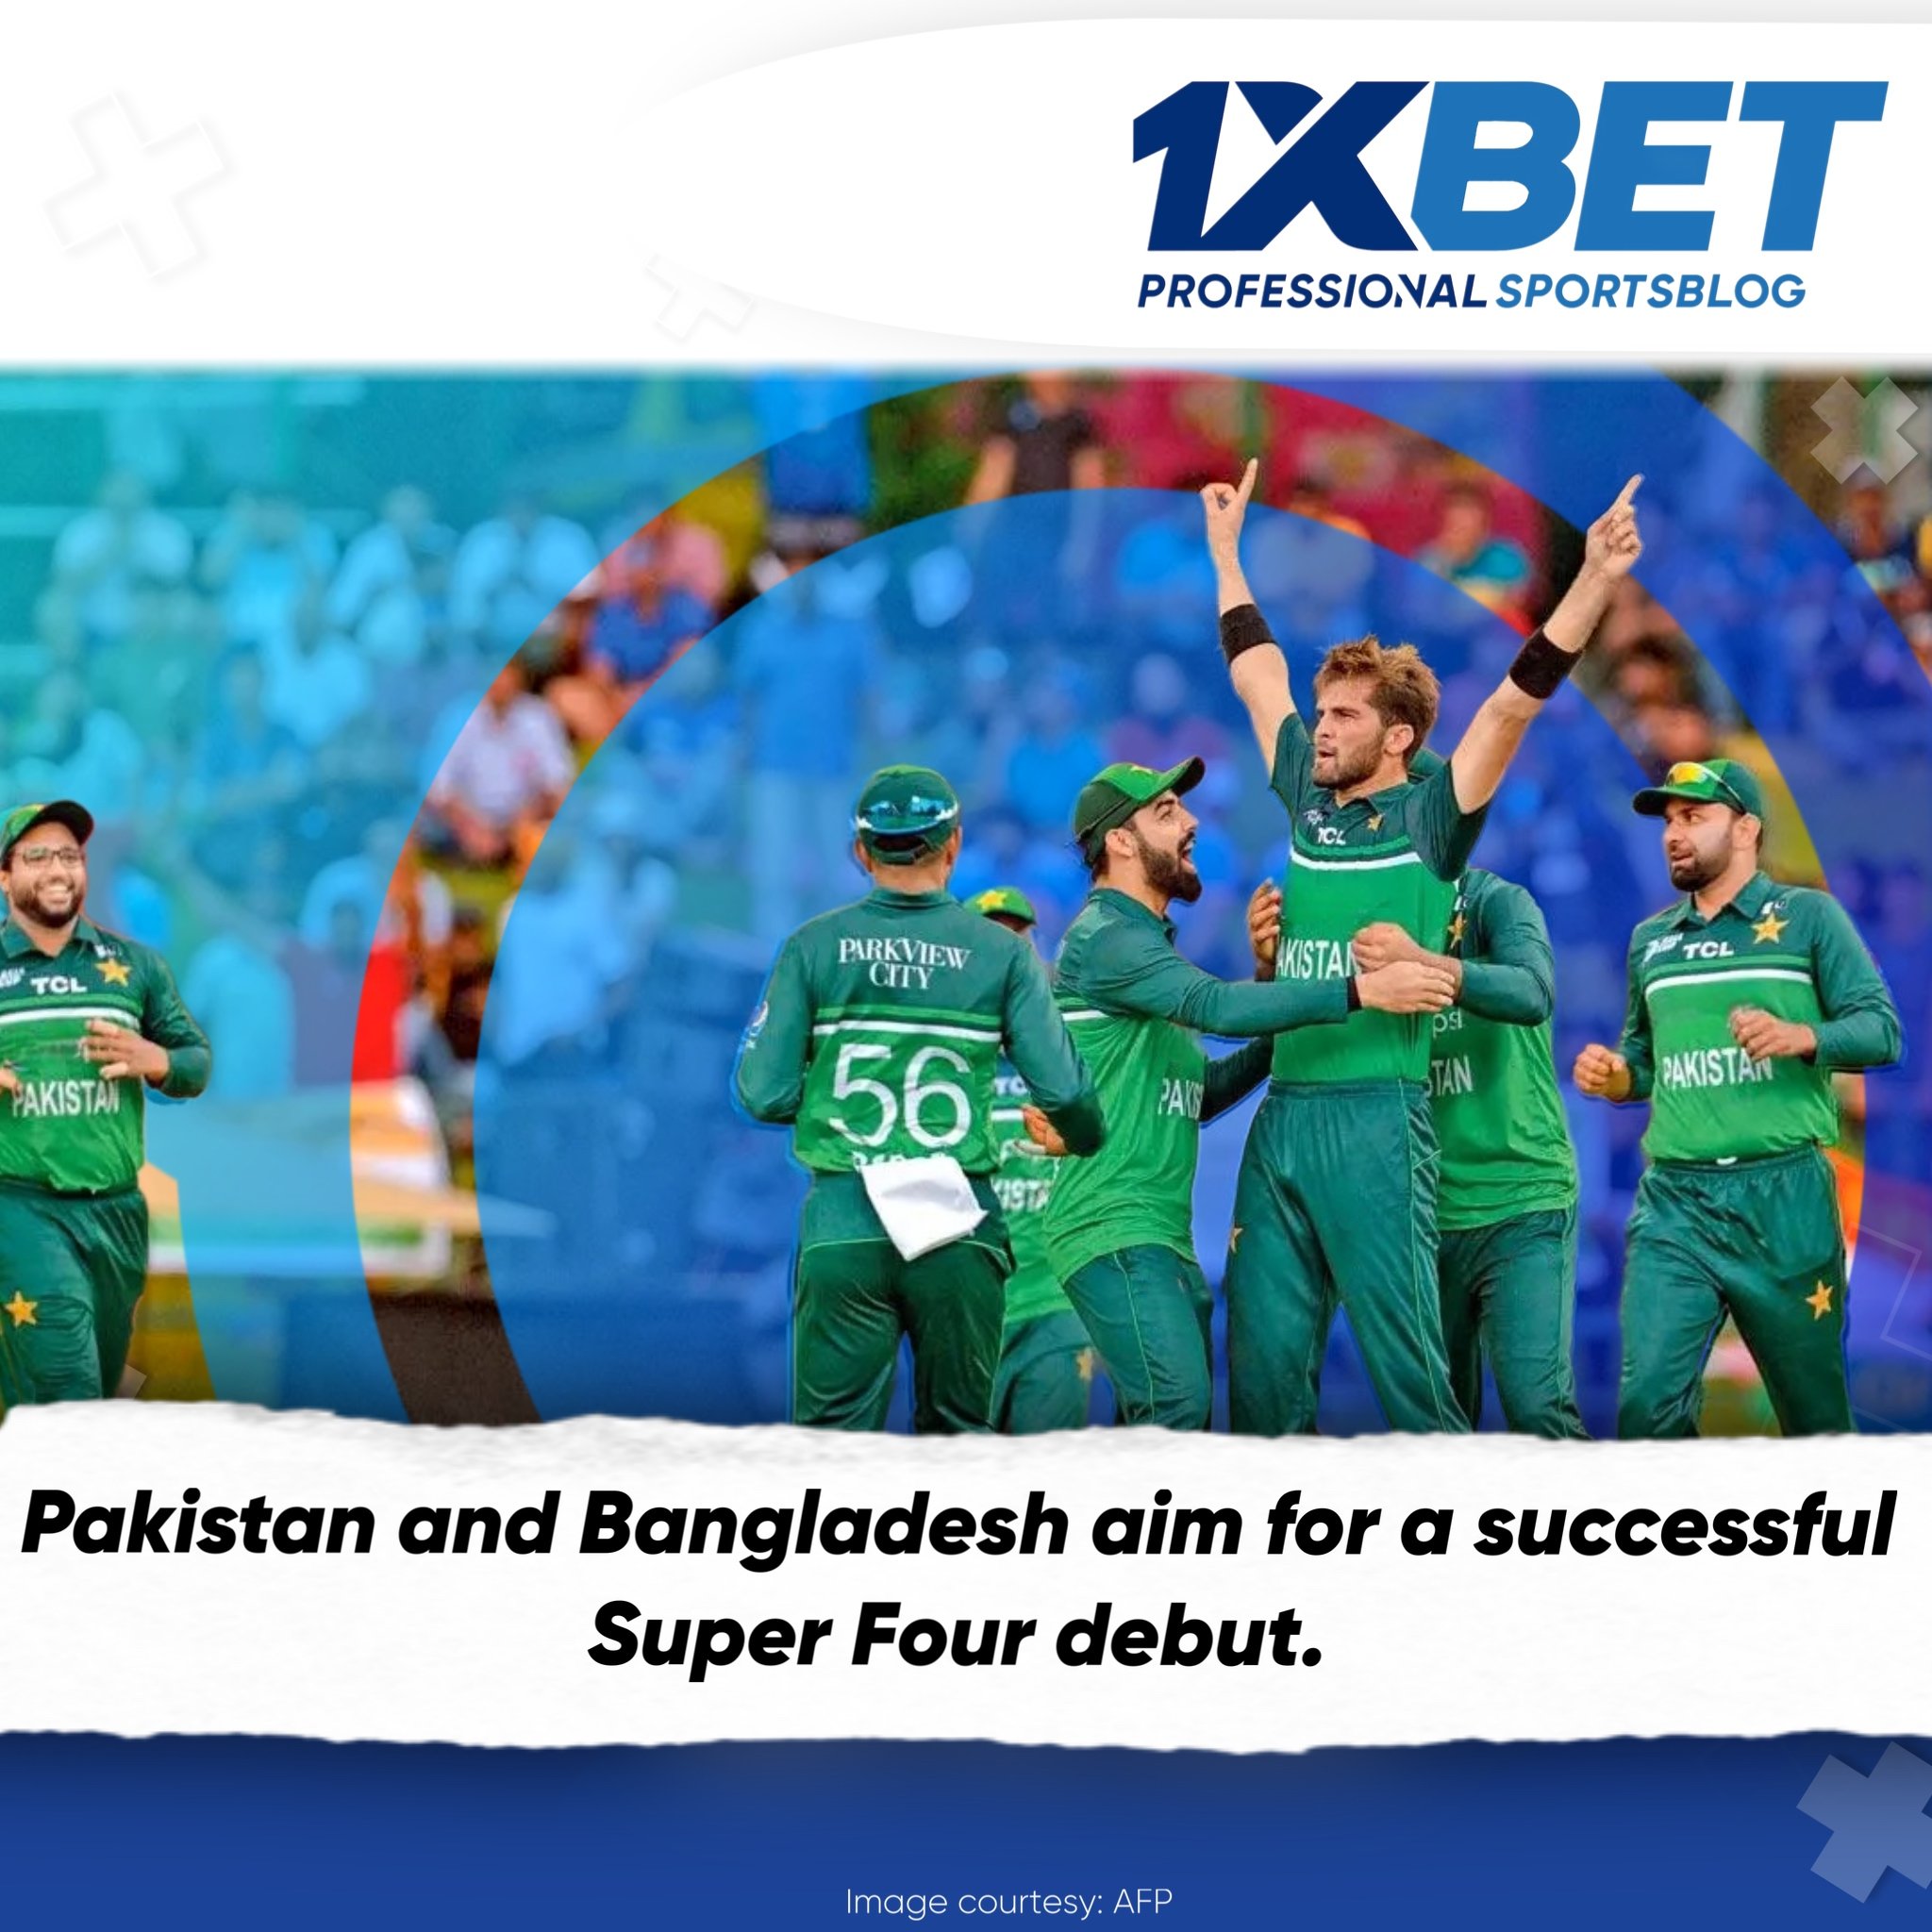 Pakistan's Bowling Attack Shines as they Face Bangladesh in Super Four Match